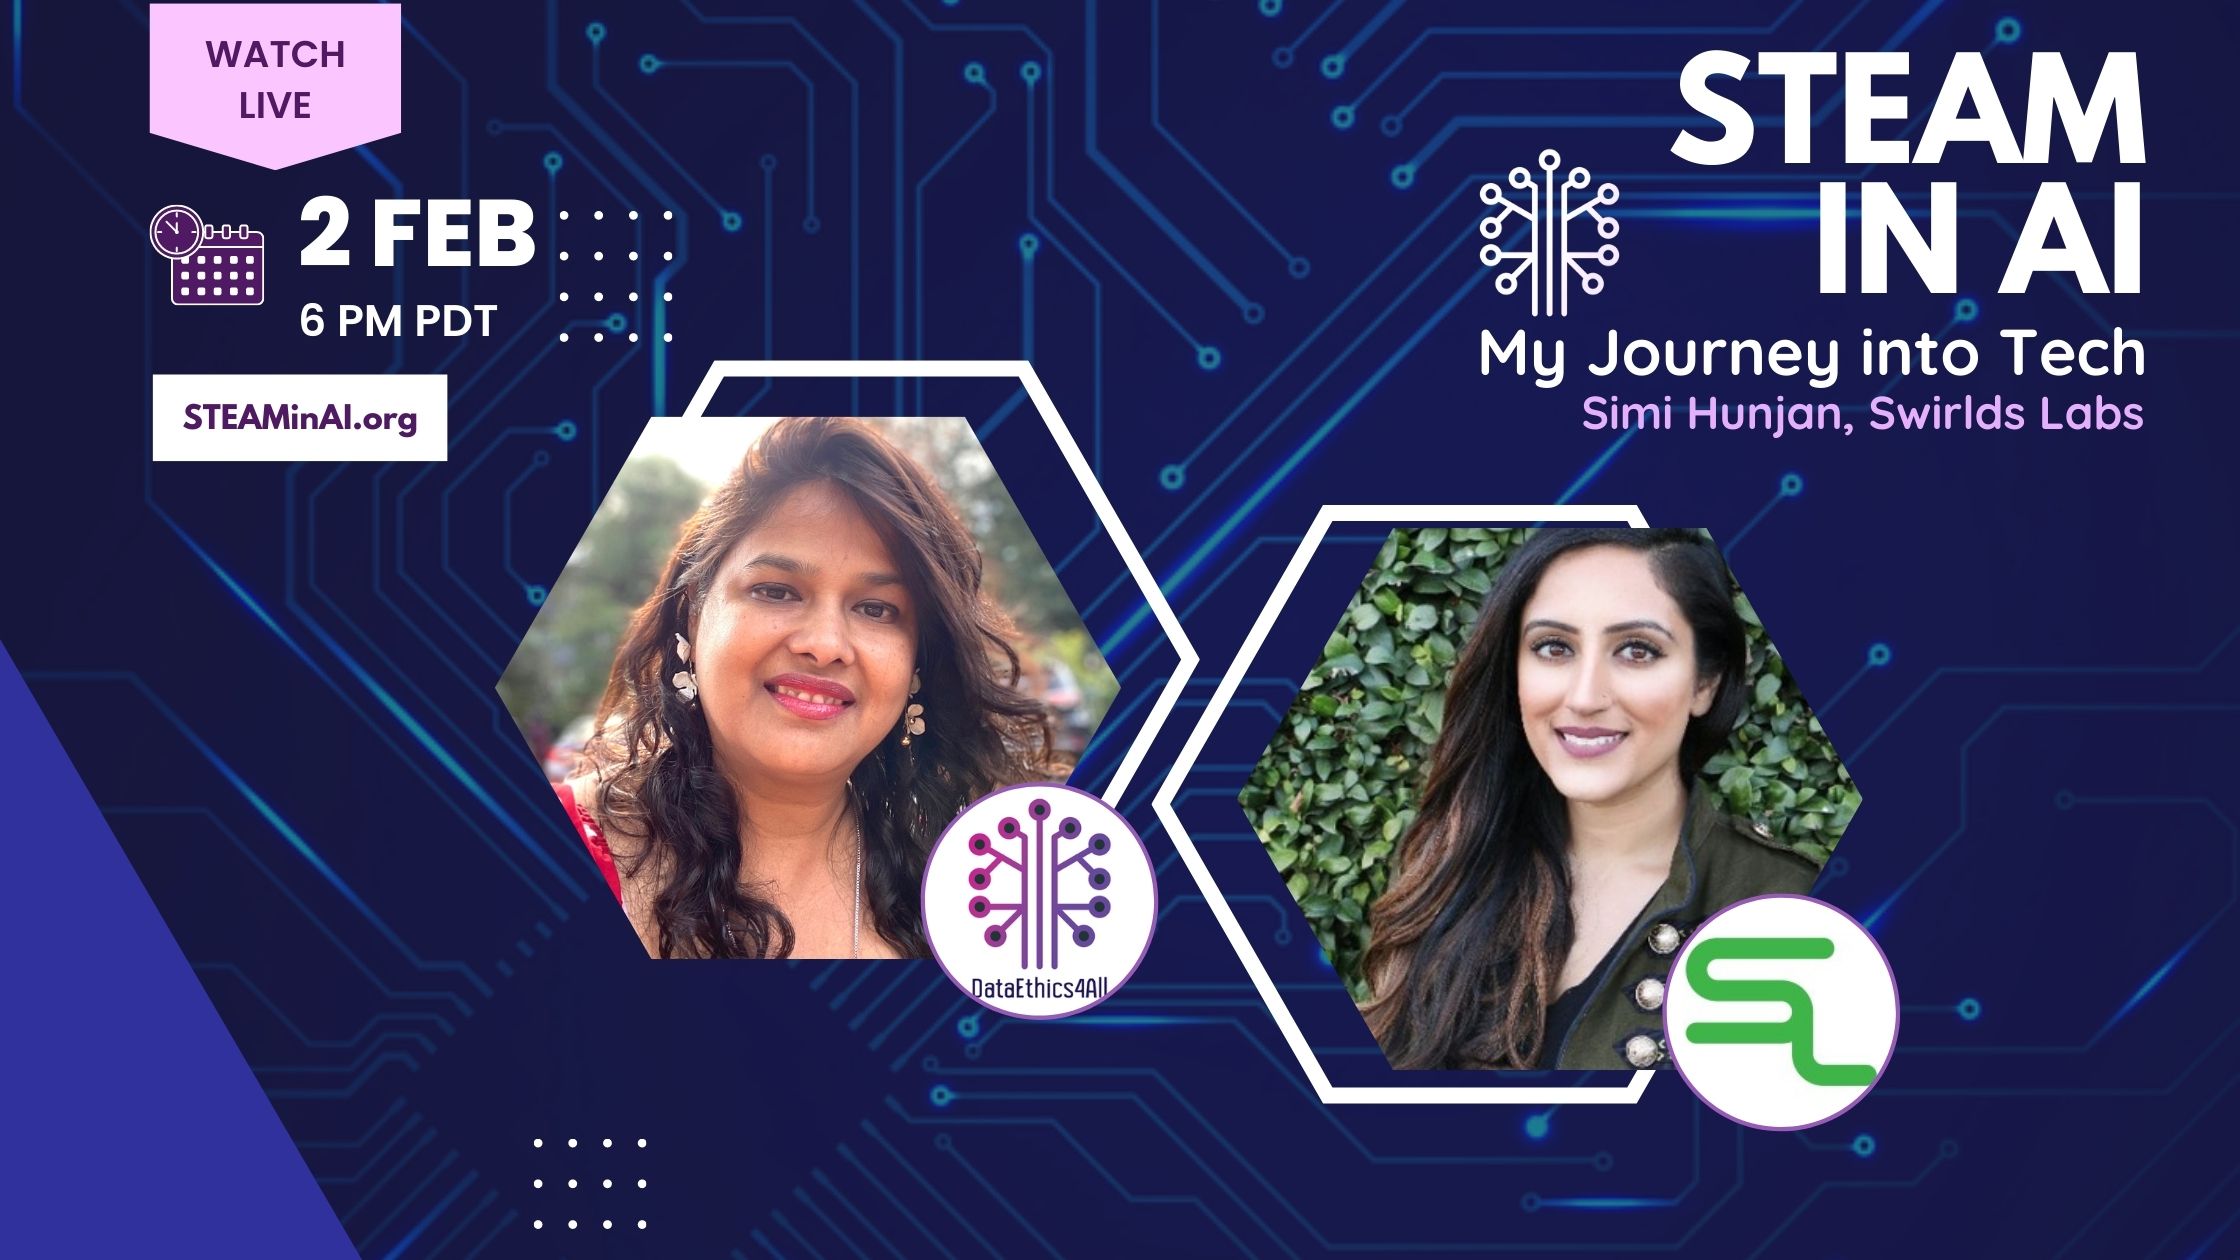 STEAM in AI My Journey into Tech with Shilpi Agarwal